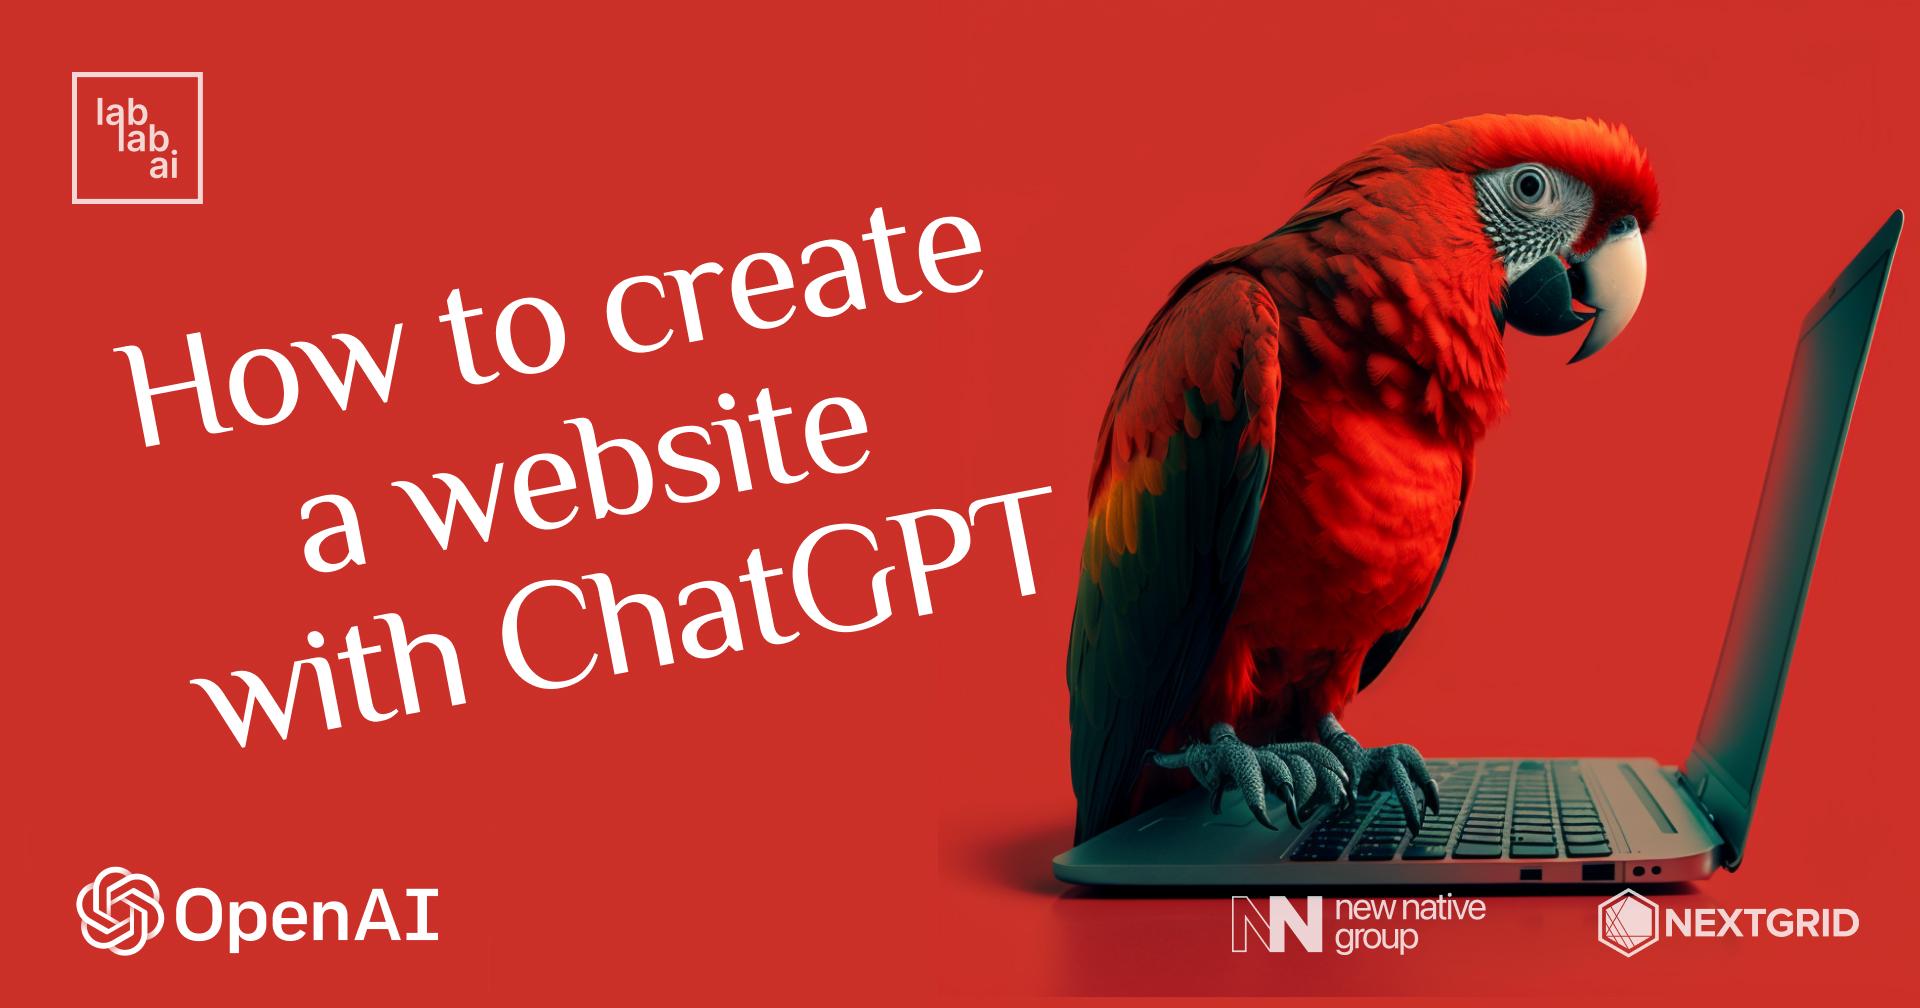 ChatGPT tutorial: How to create a website with ChatGPT